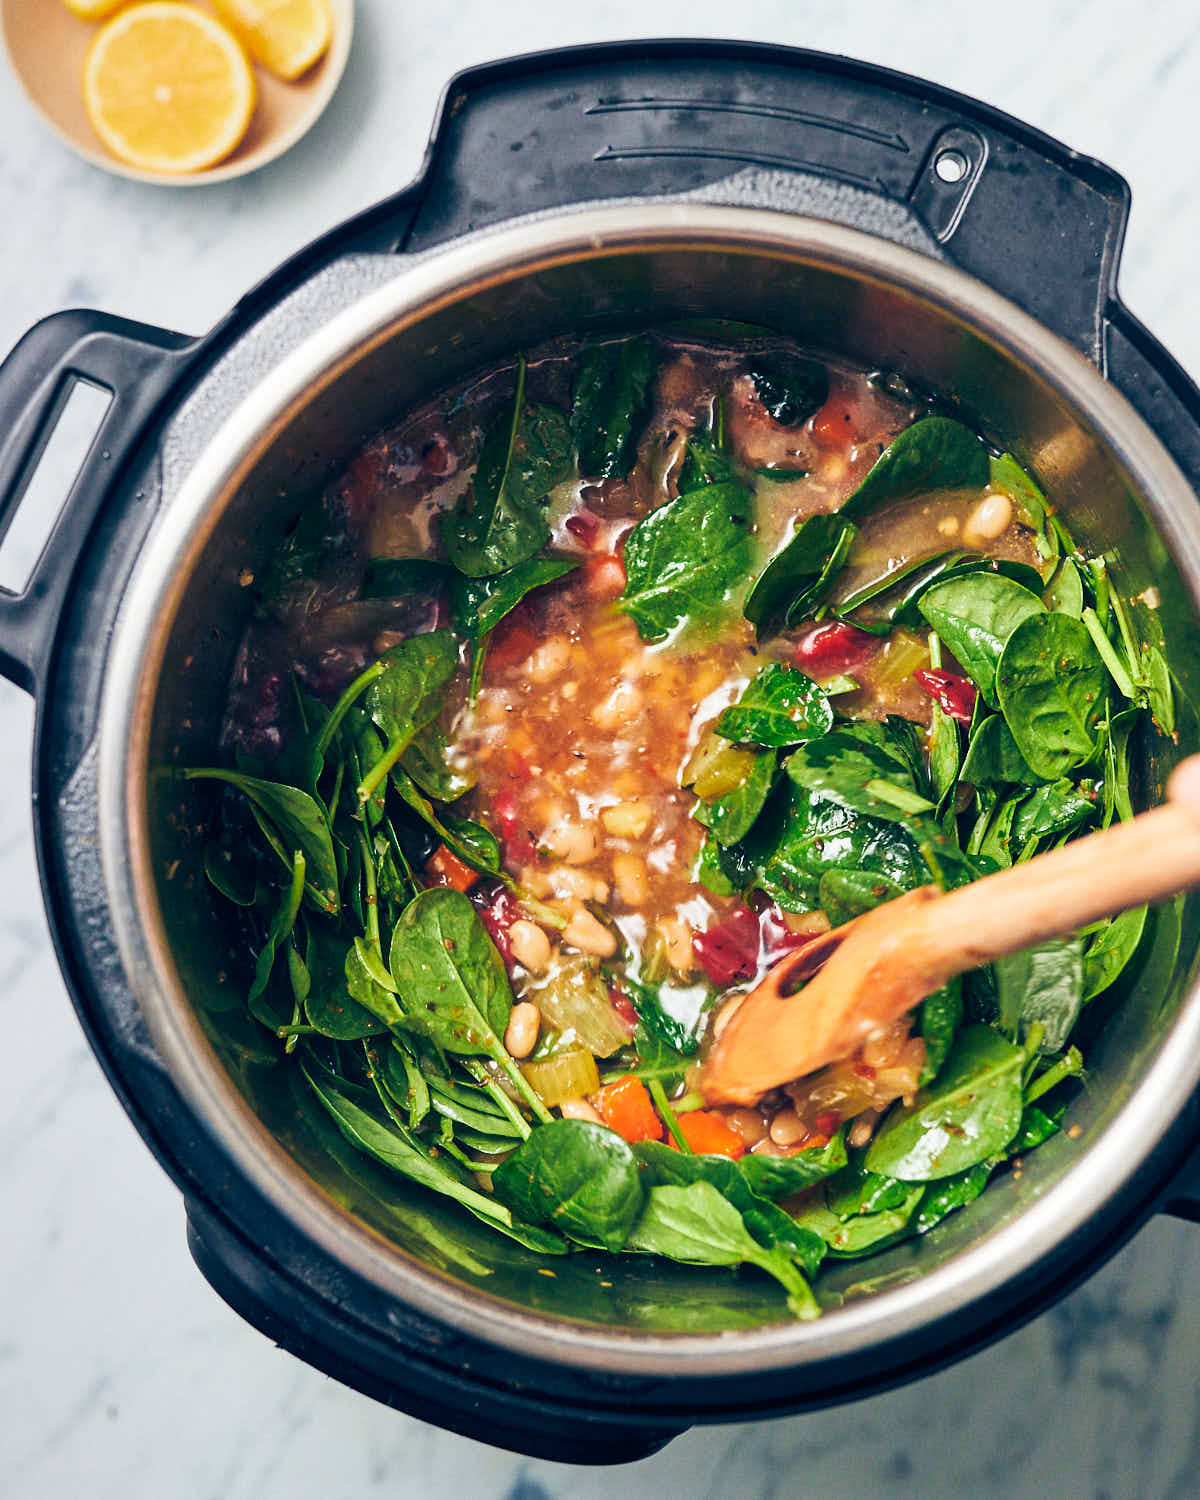 A wooden spoon stirring baby spinach into an Instant Pot full of navy bean soup